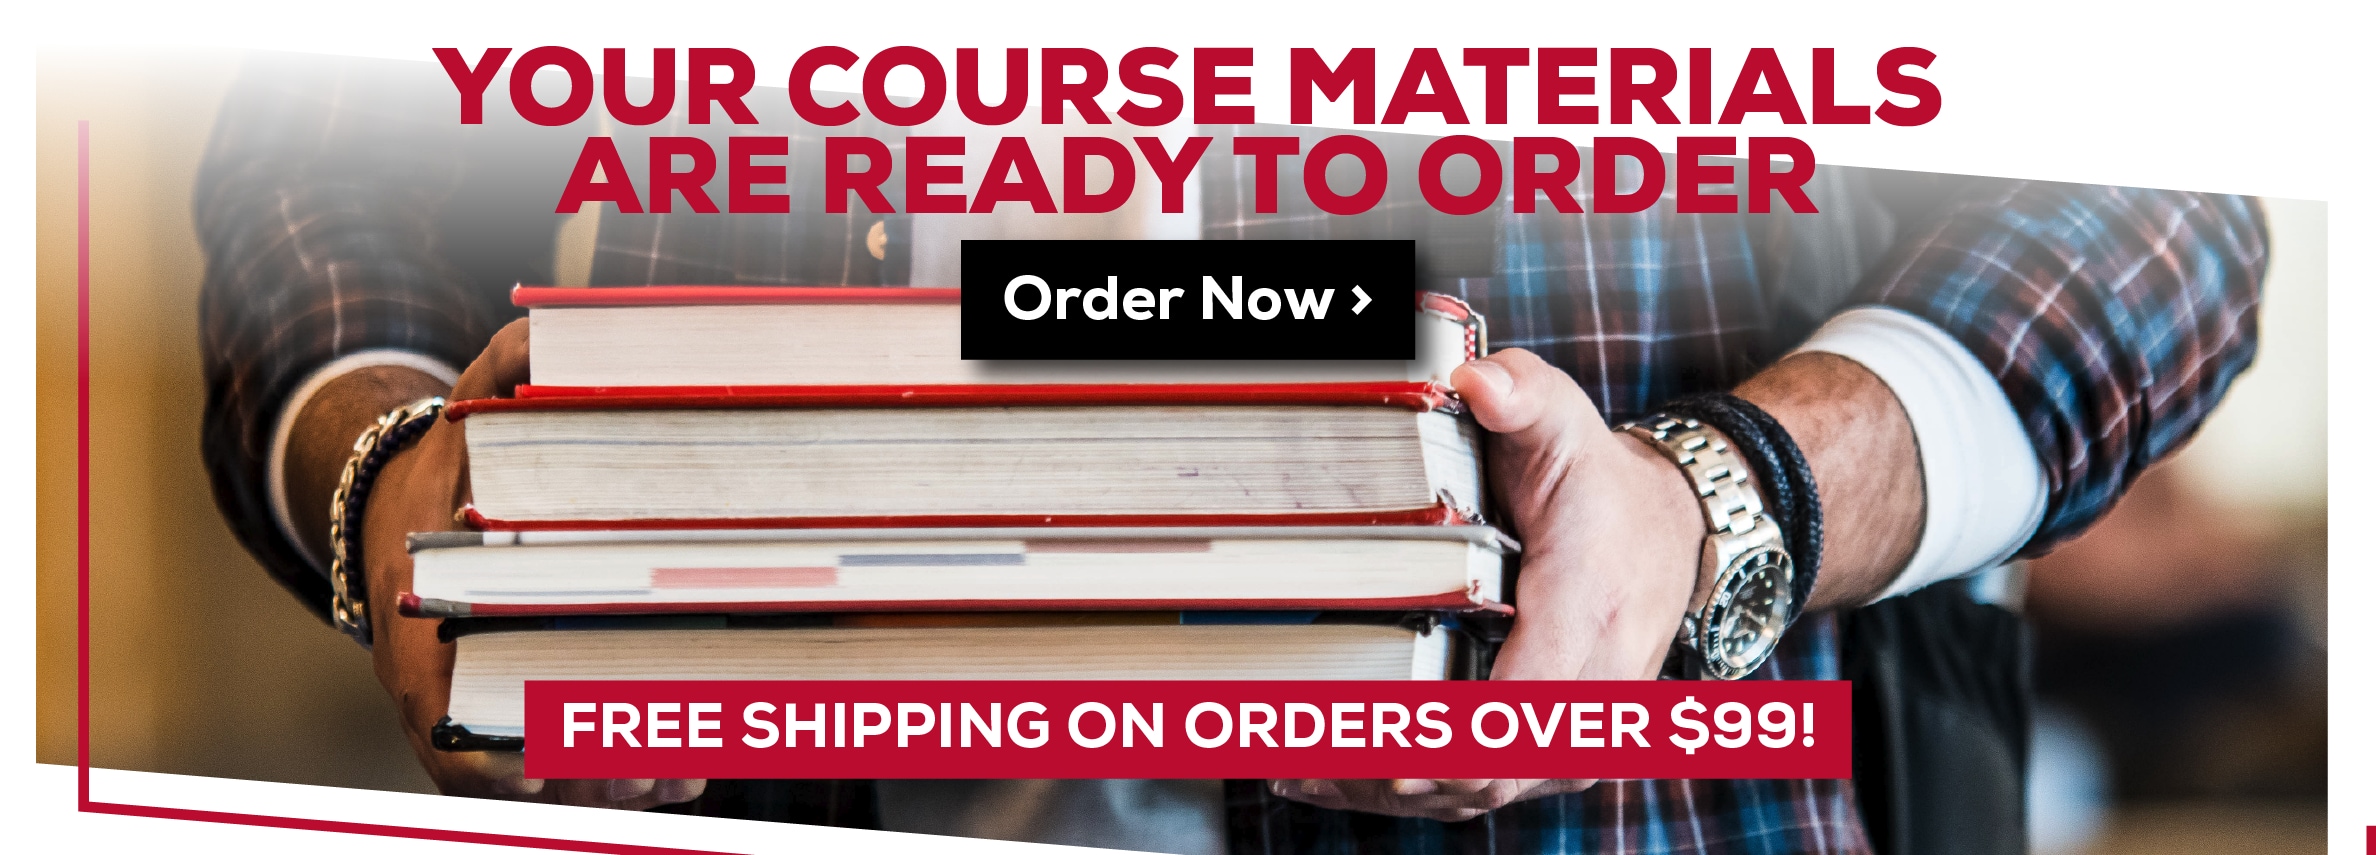 Your Course Materials are Ready to Order. Order Now. Free shipping on orders over $99! *Excludes marketplace purchases.